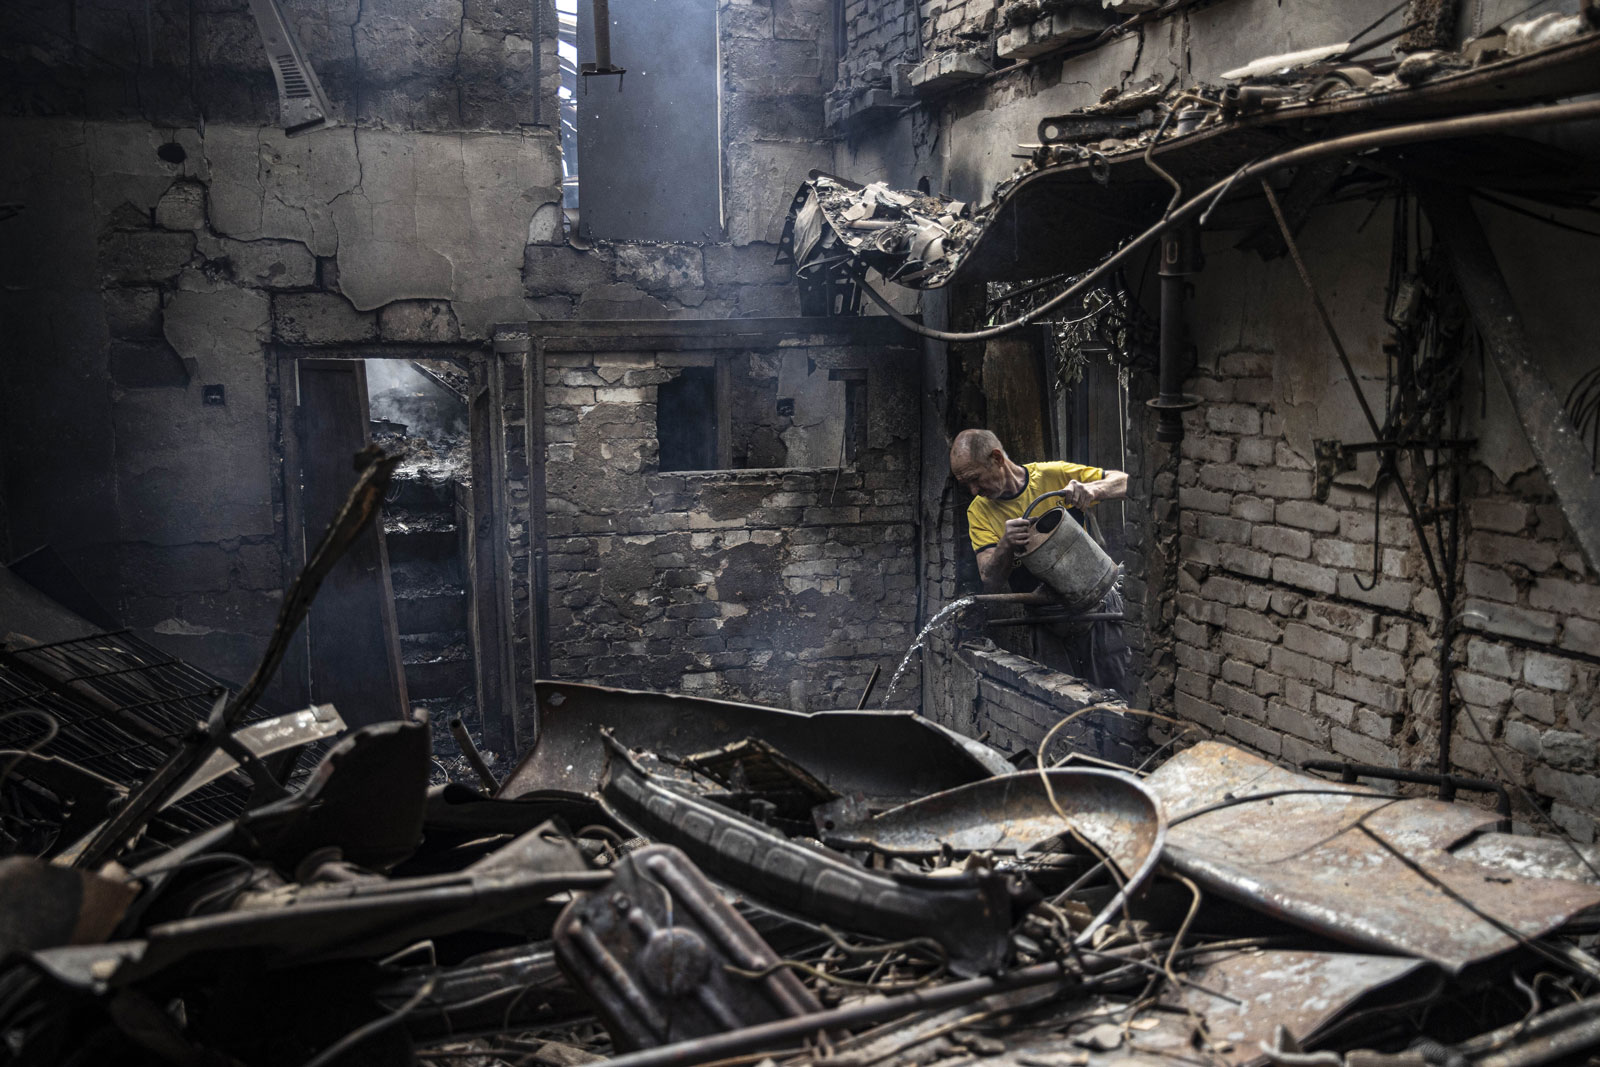 A man tries to extinguish fire in a damaged house after a Russian airstrike in Slavyansk, Donetsk oblast on Tuesday.